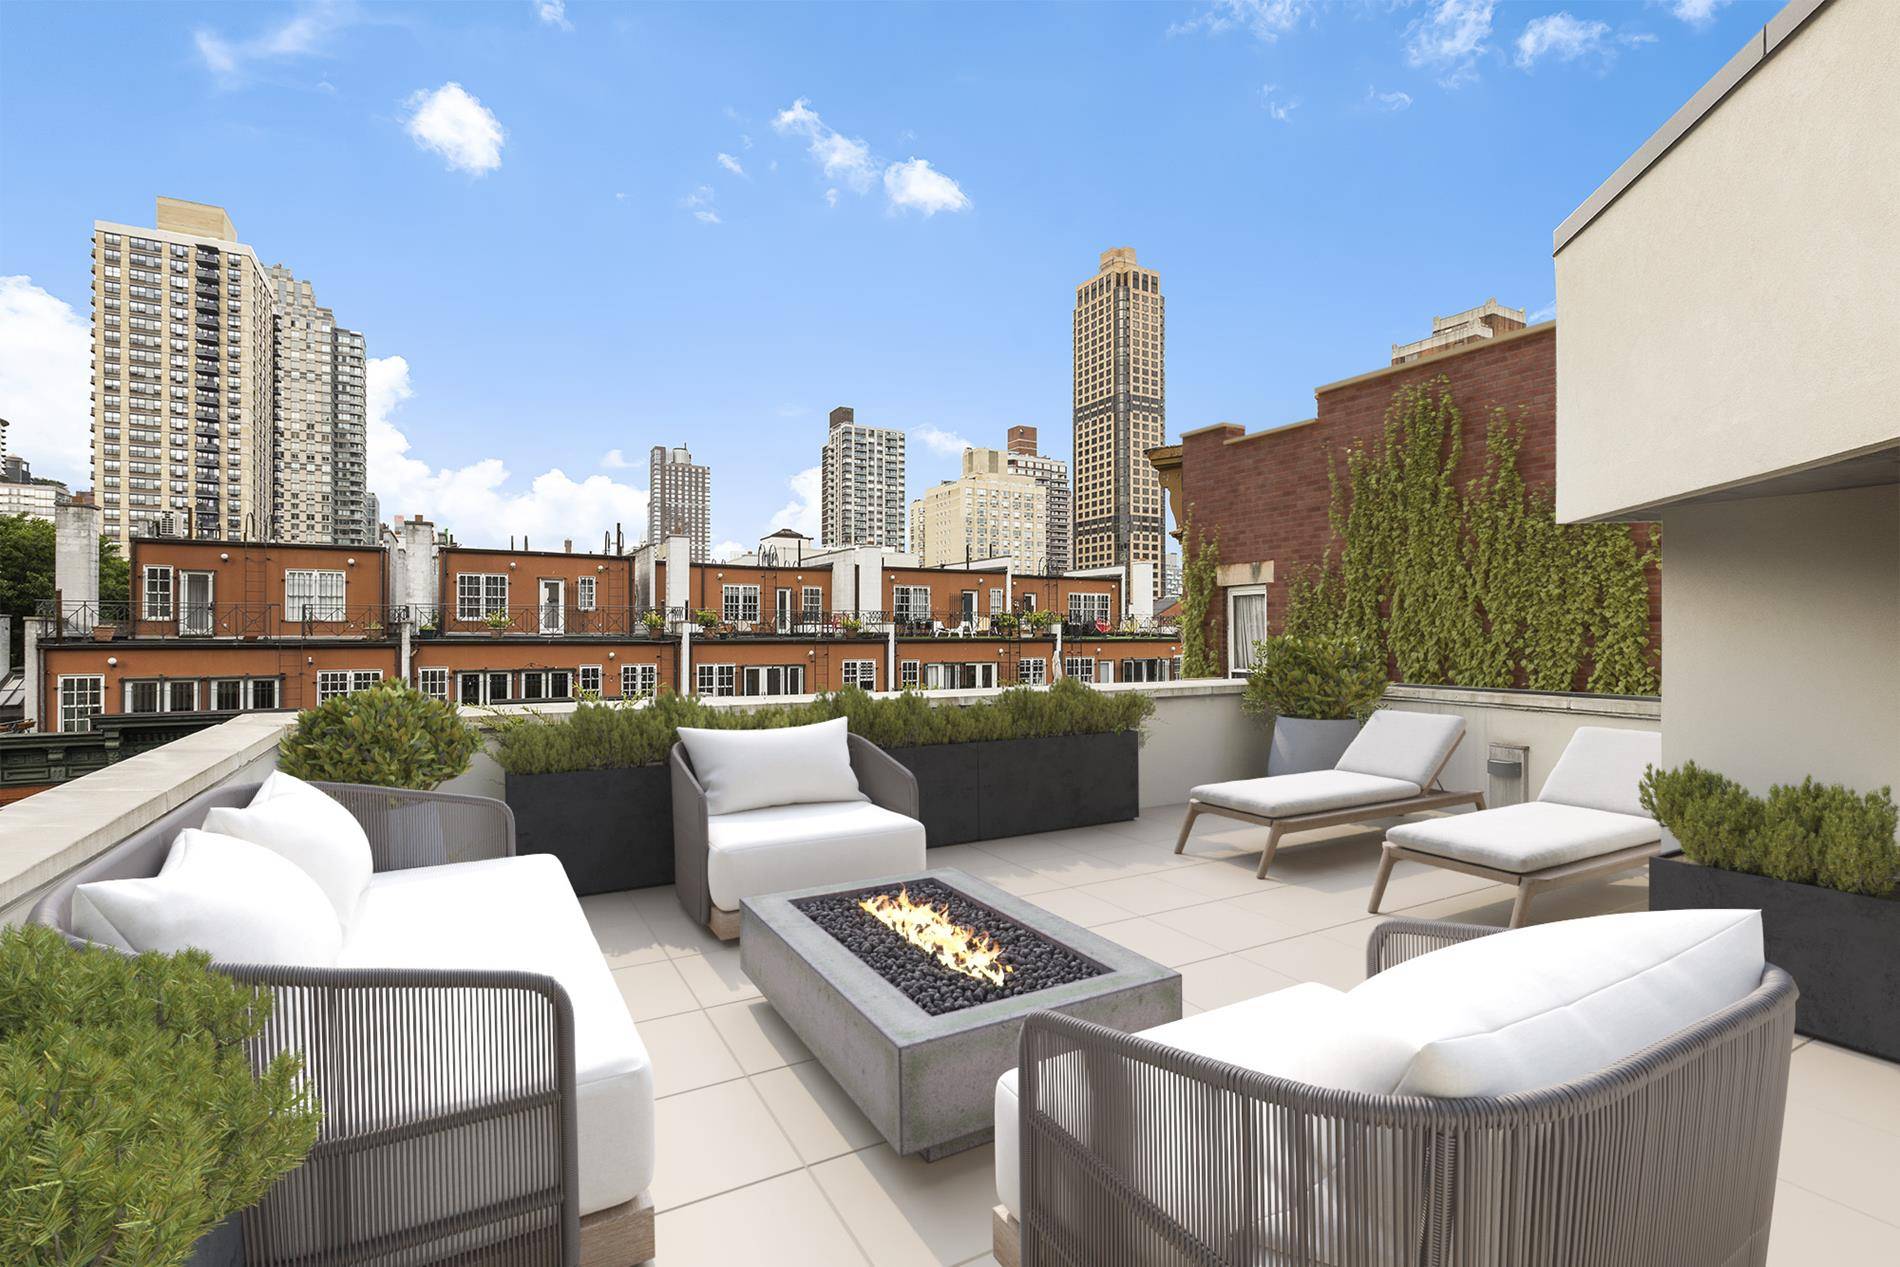 318 East 81st Street is a new boutique collection of two and three bedroom full floor condominium residences with a part time doorman.